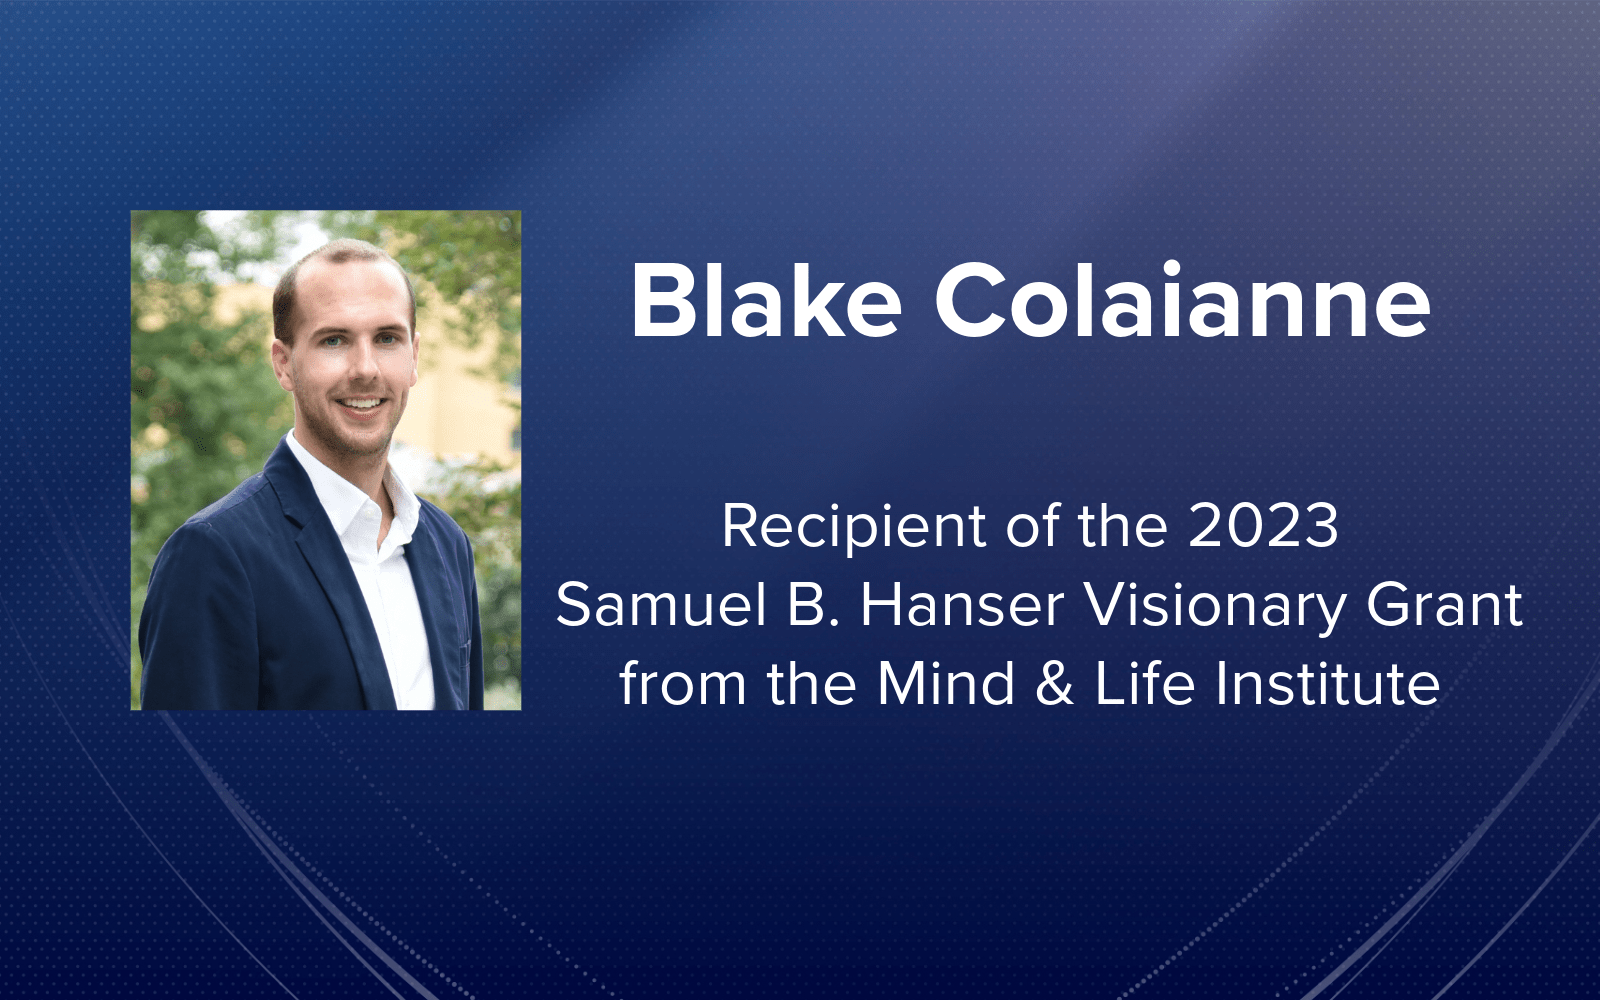 Recipient of the 2023 Samuel B. Hanser Visionary Grant from the Mind & Life Institute